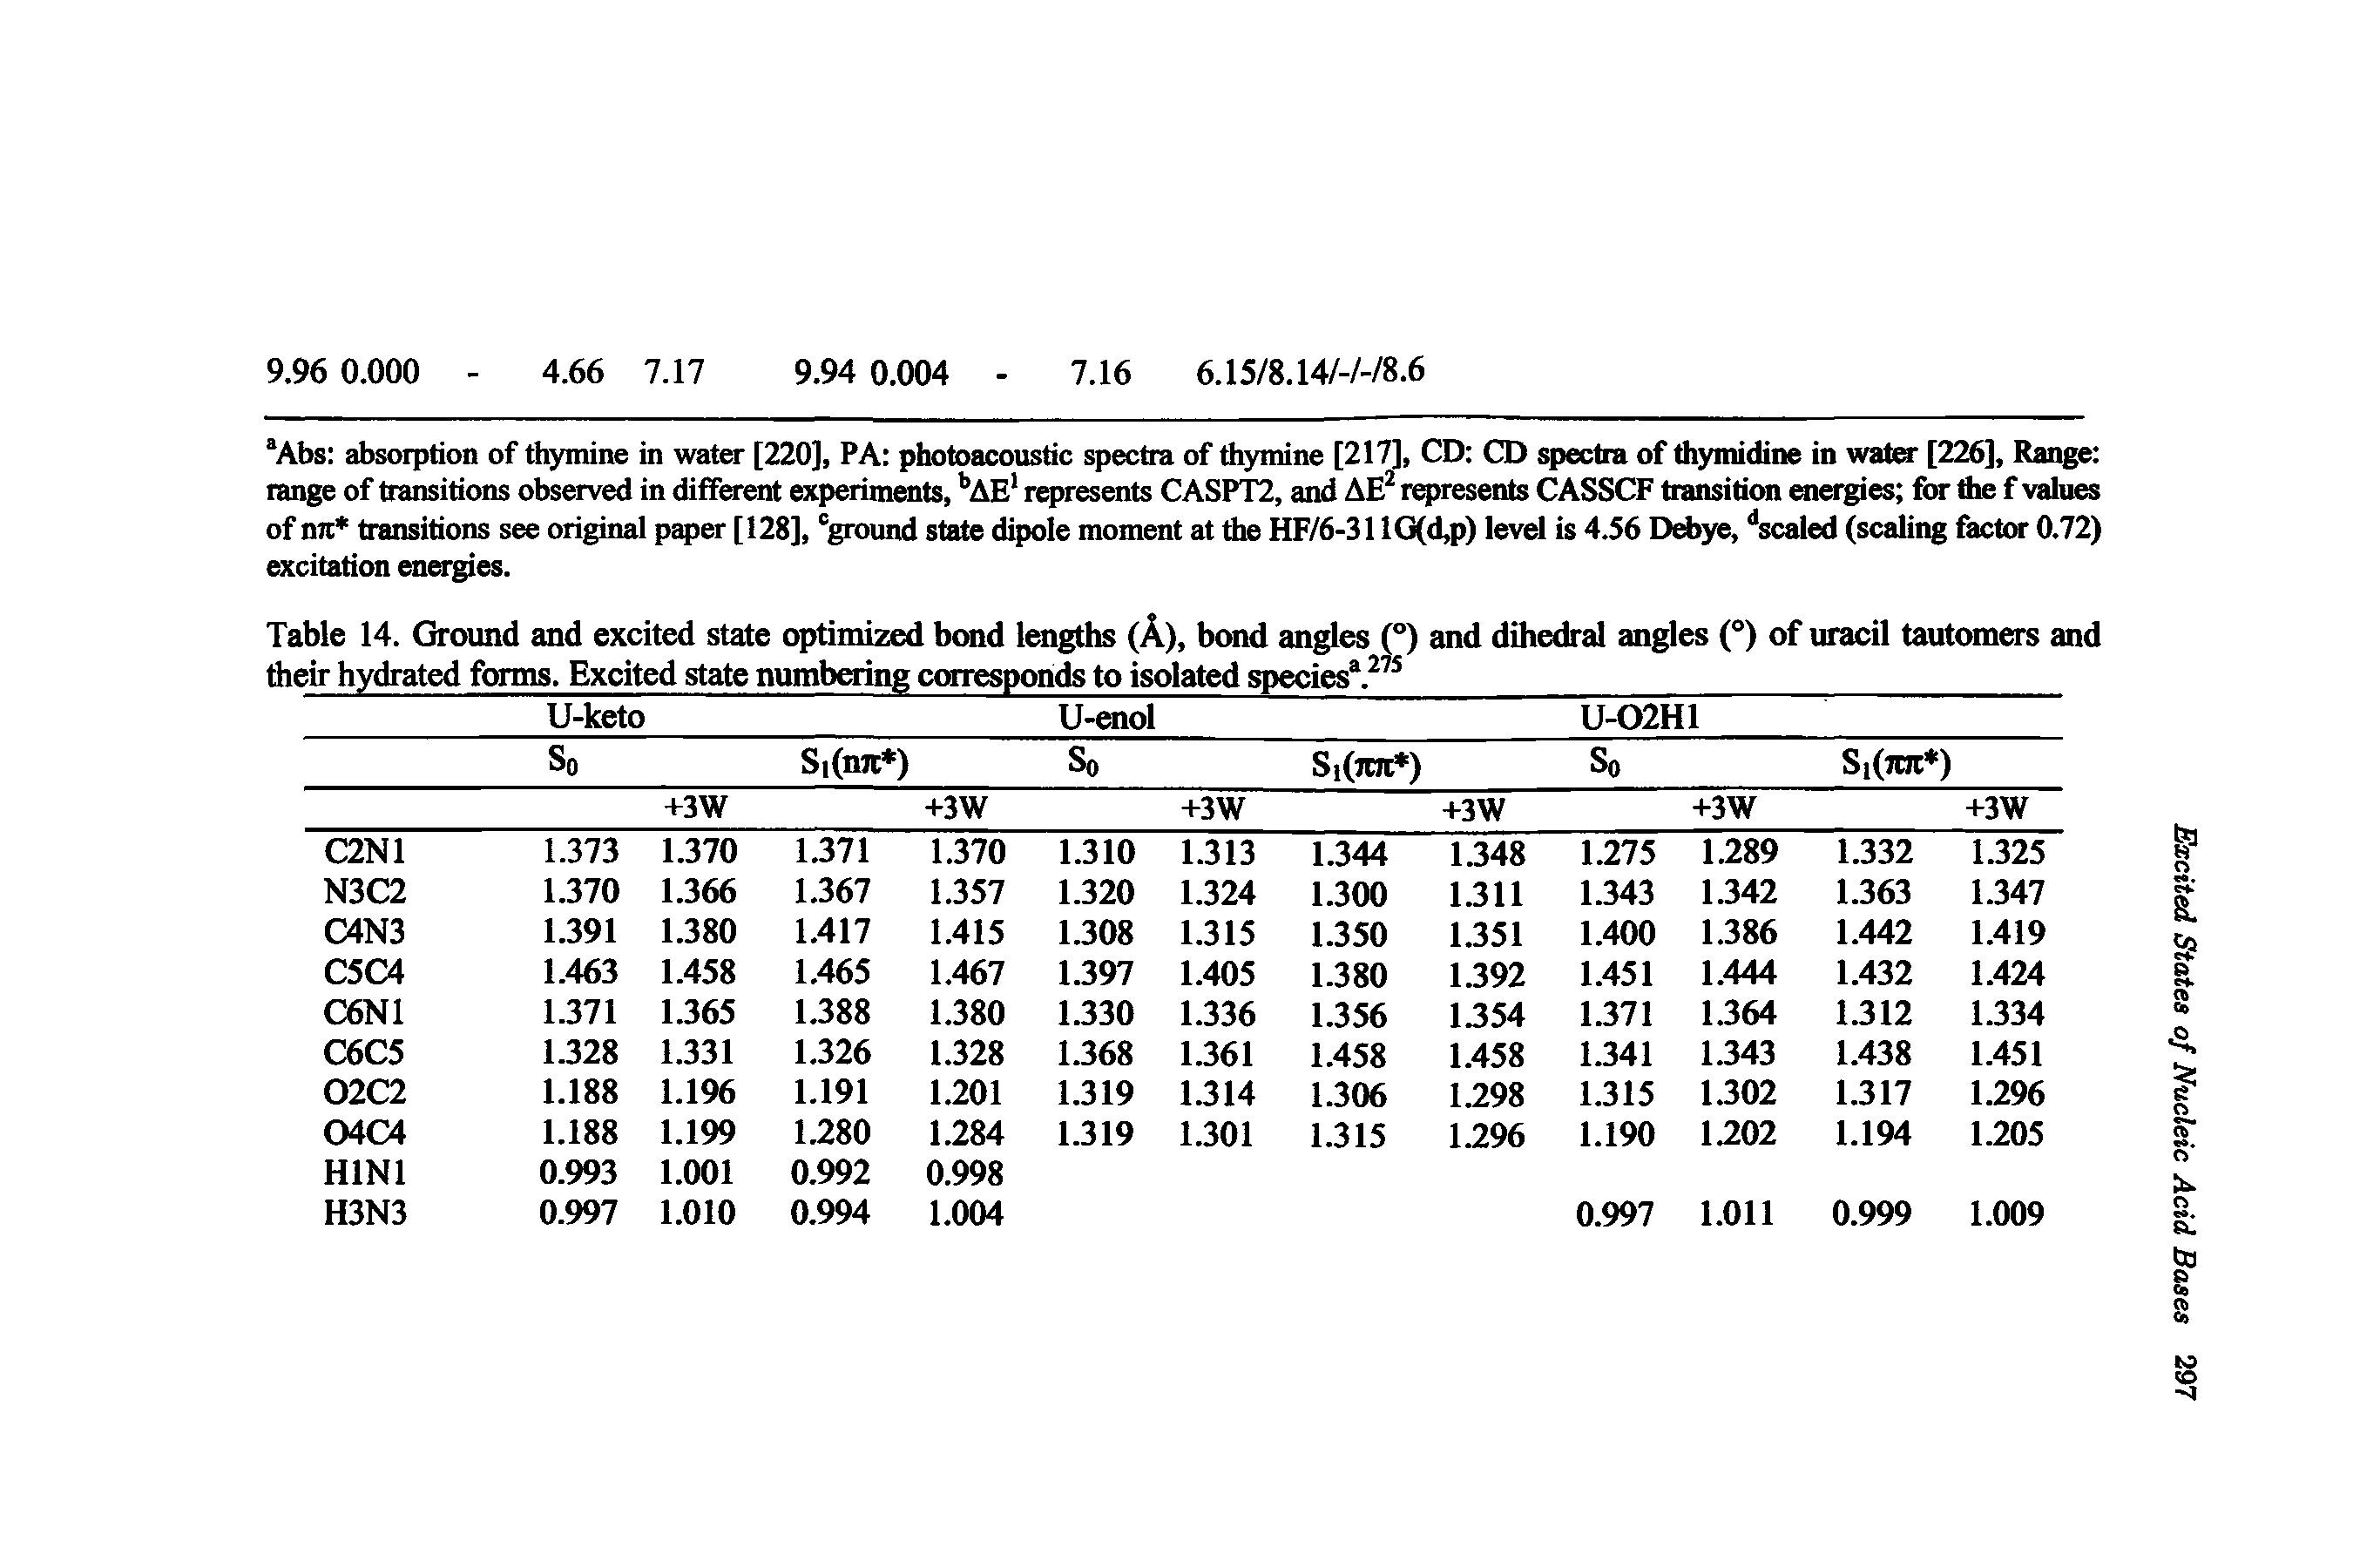 Table 14. Ground and excited state optimized bond lengths (A), bond angles (°) and dihedral angles (°) of uracil tautomers and their hydrated forms. Excited state numbering corresponds to isolated species ...